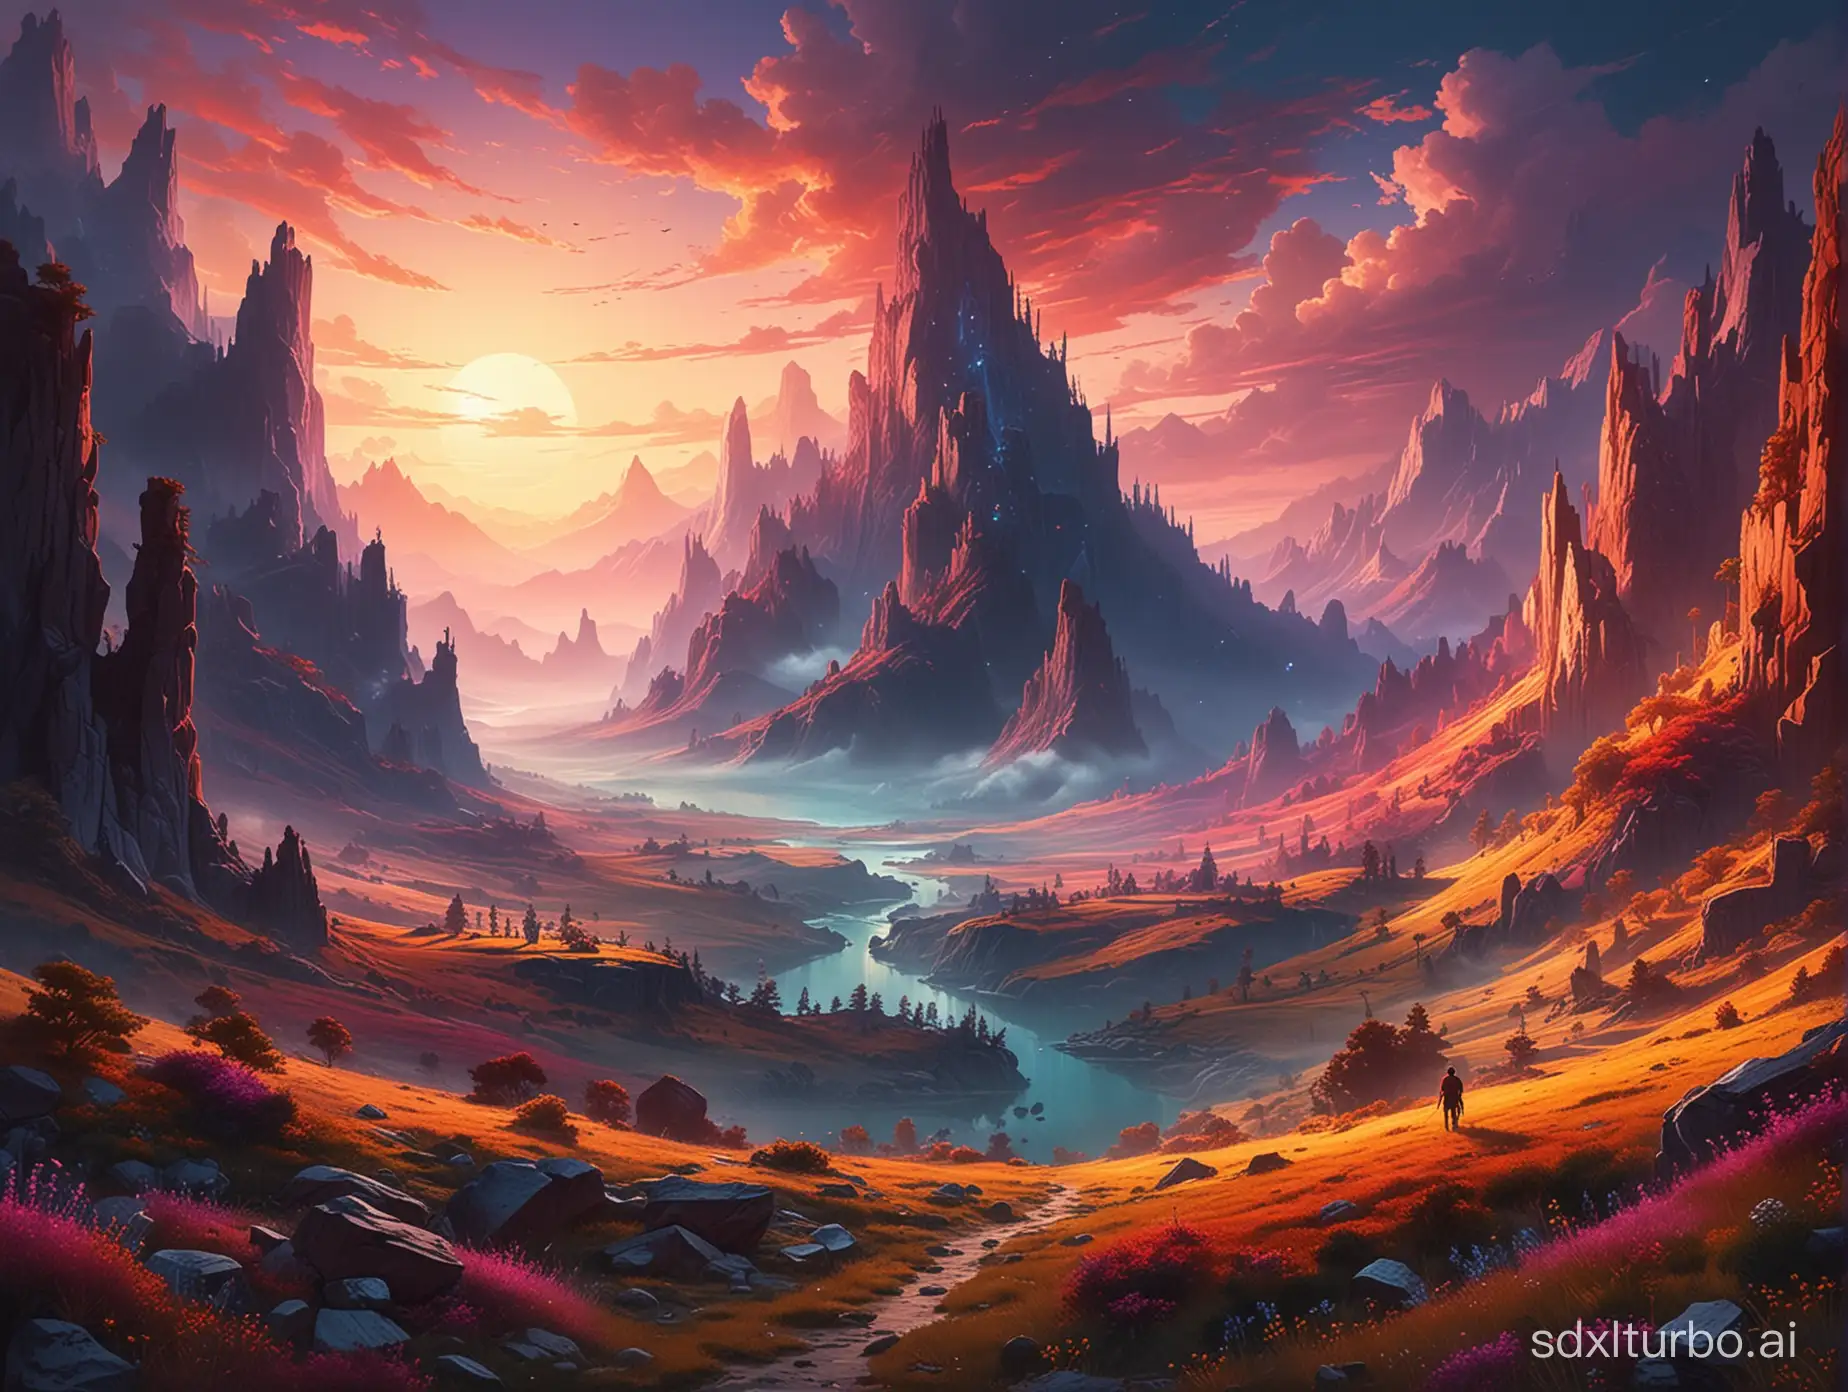 Dreamy landscapes of an alternate world, colorful and vibrant, with interplay of light and shadow, brimming with mystery and fantasy.